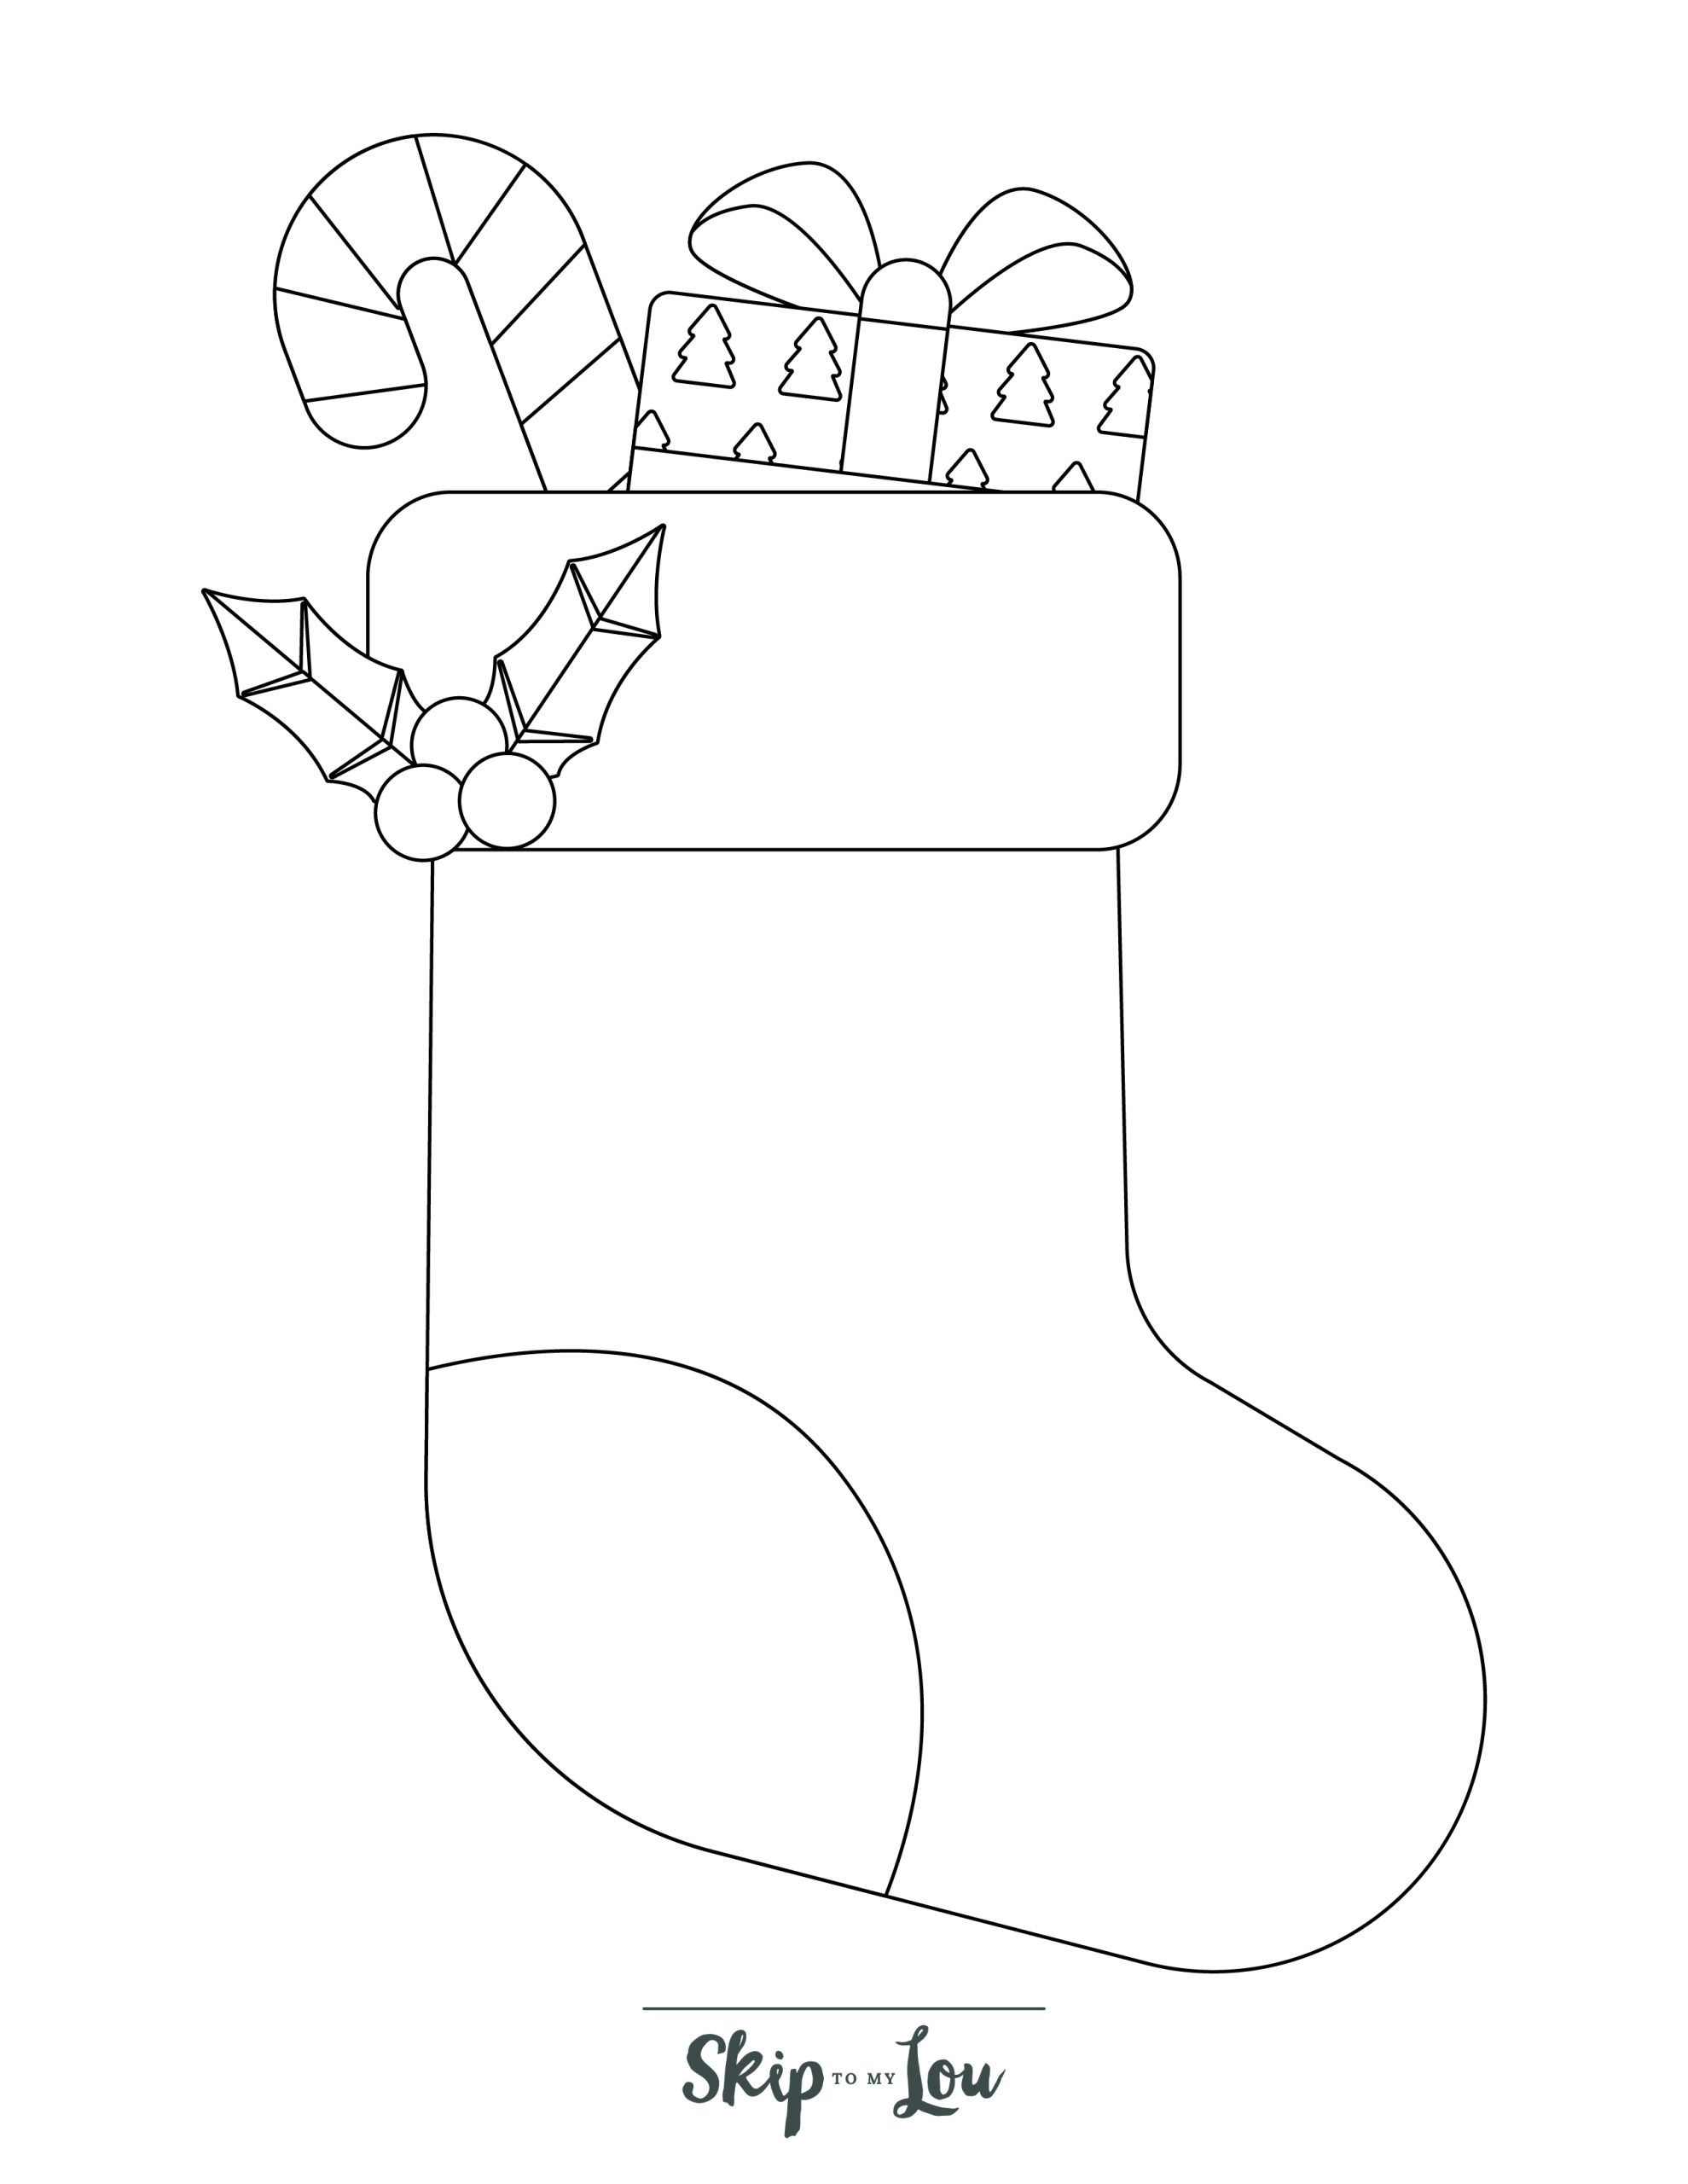 Holiday Coloring Page 3 - Line drawing of a Christmas stocking 